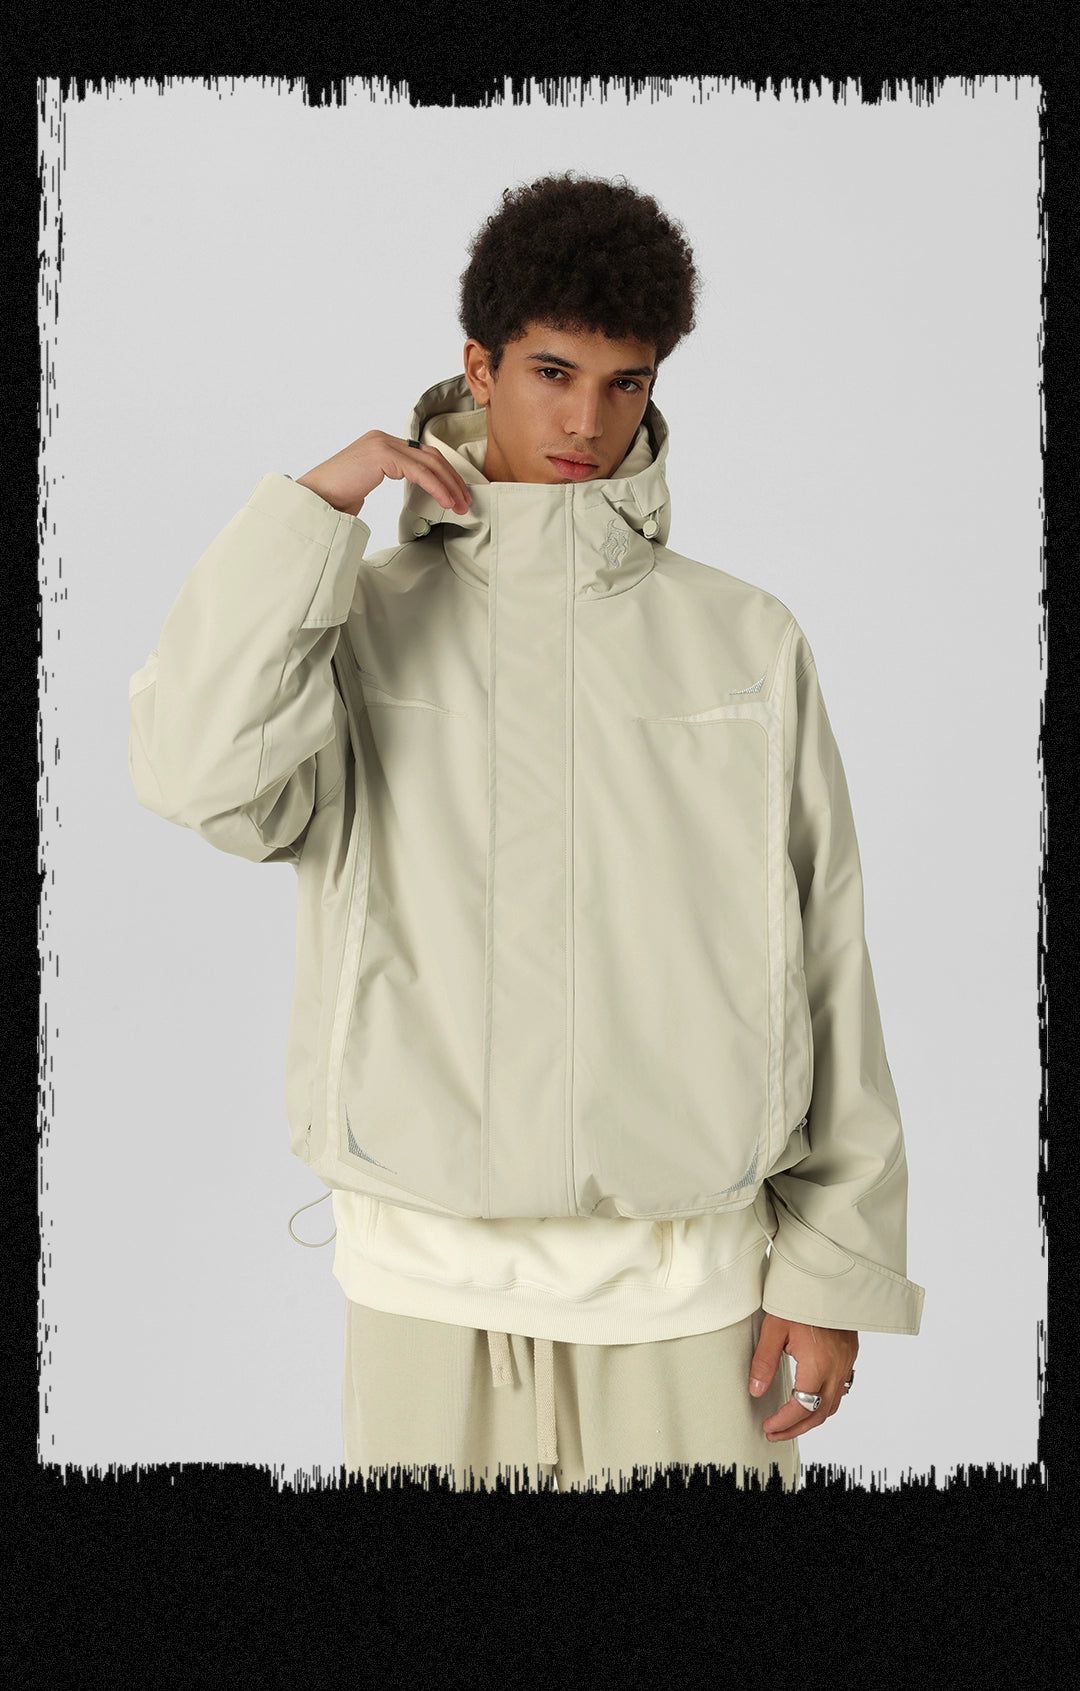 Solid Color Hooded Jacket Korean Street Fashion Jacket By JHYQ Shop Online at OH Vault